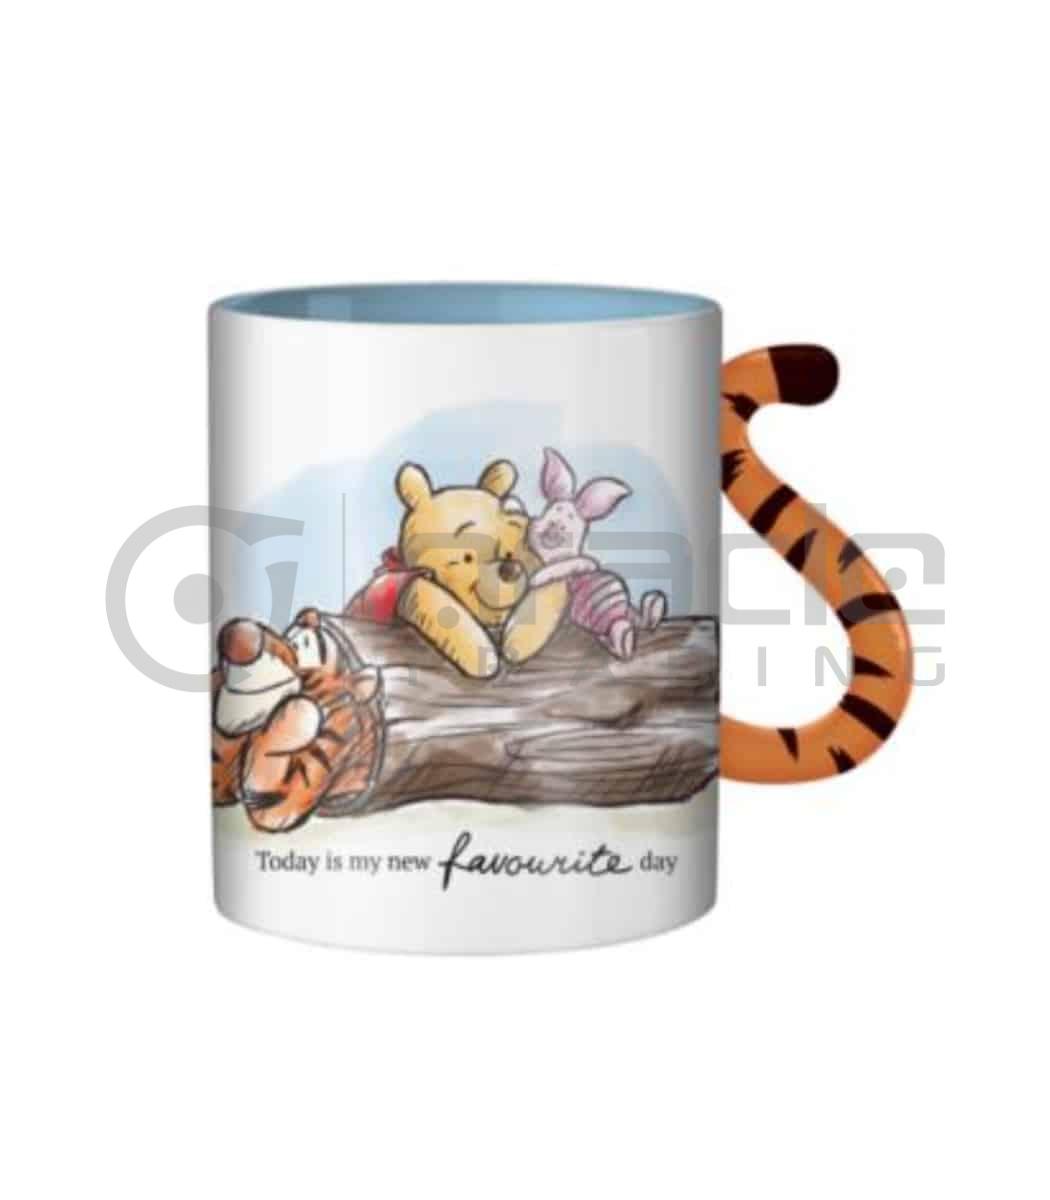 Winnie the Pooh Sculpted Mug - Favourite Day